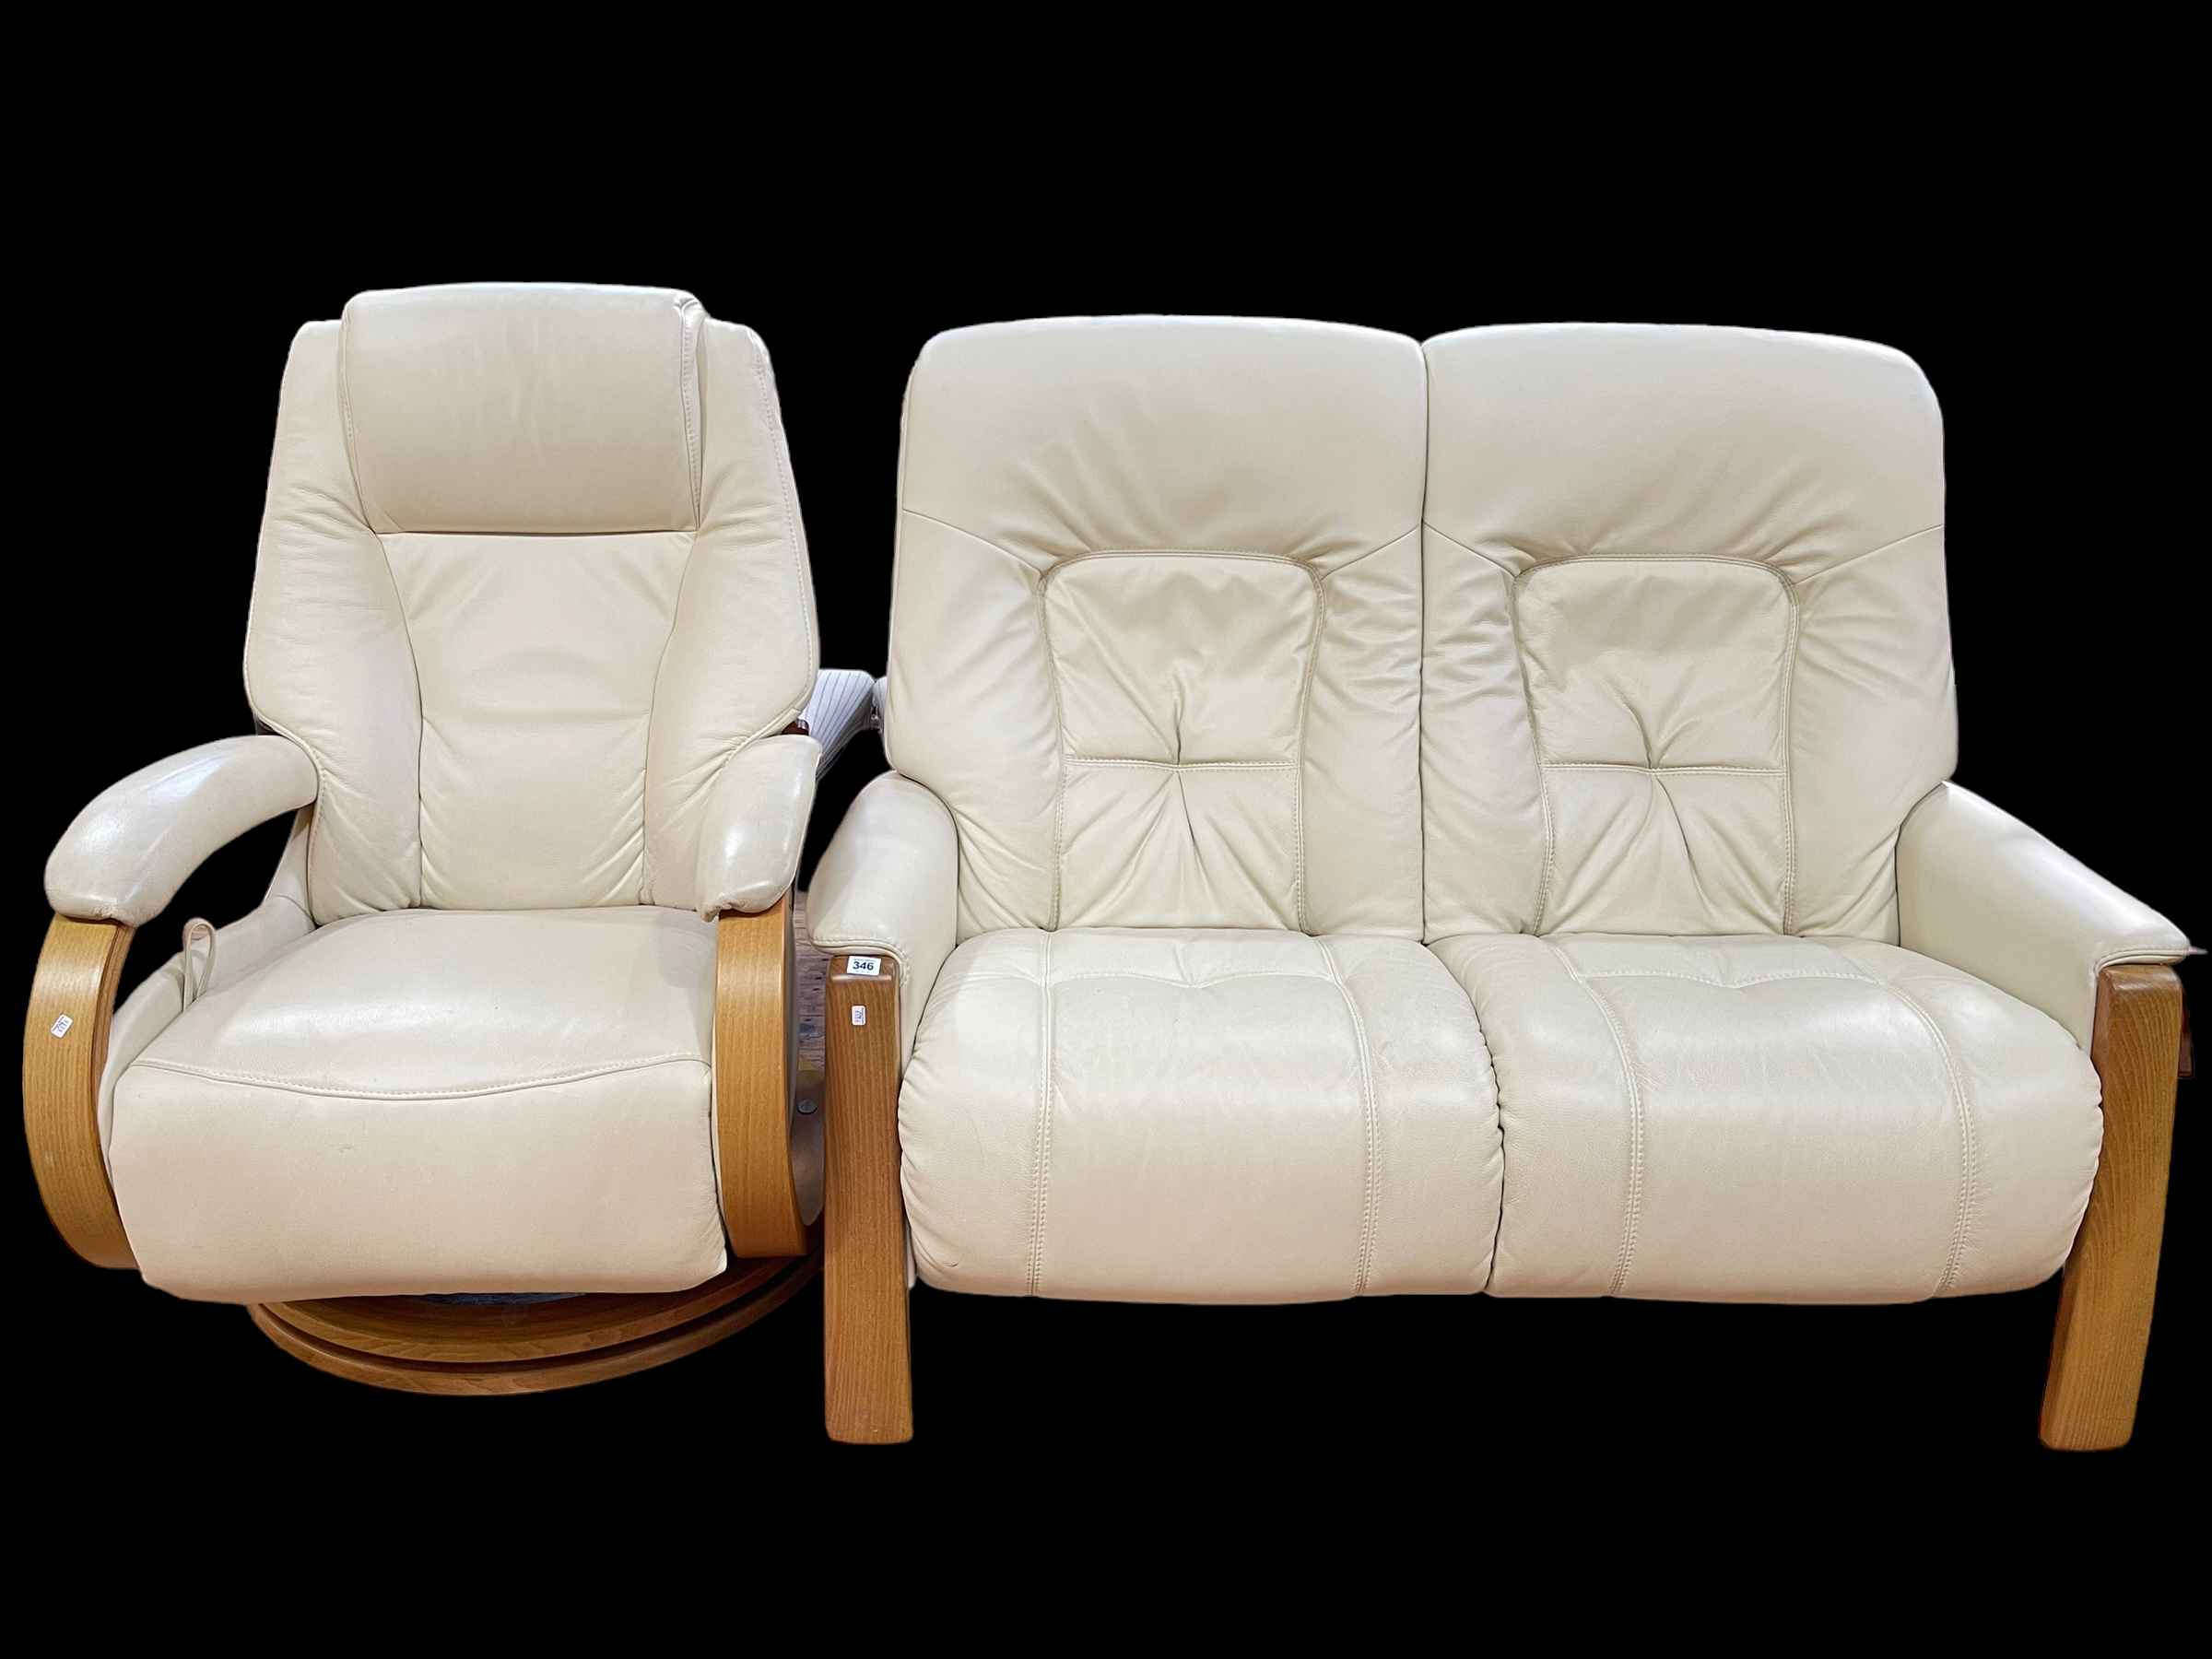 Himolla leather two seater settee and reclining chair.